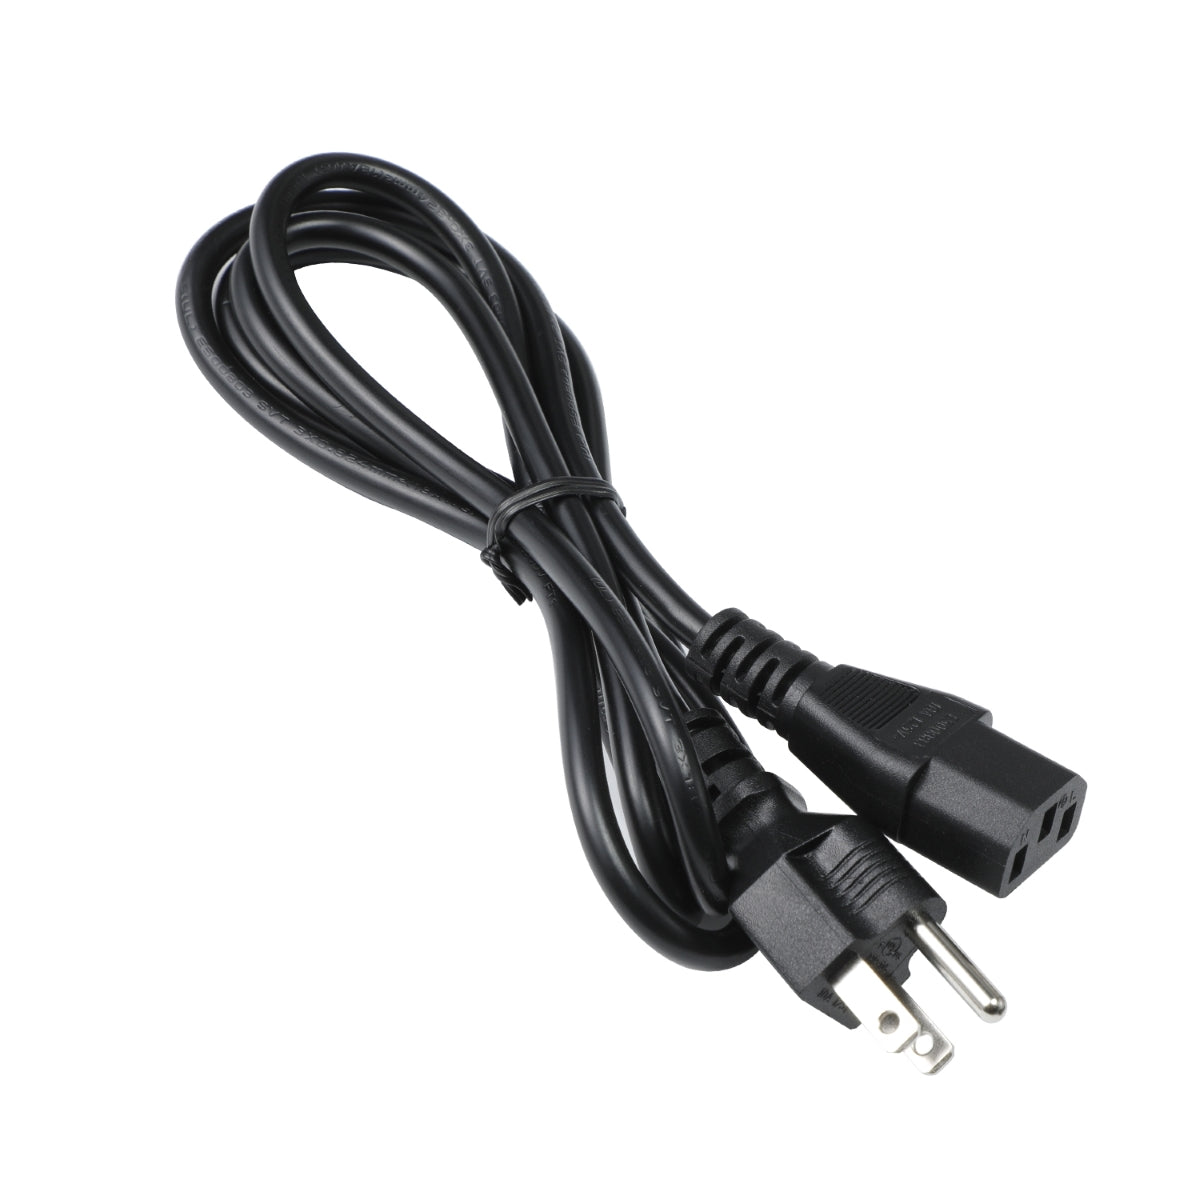 Power Cord for ViewSonic VS2210-H Monitor